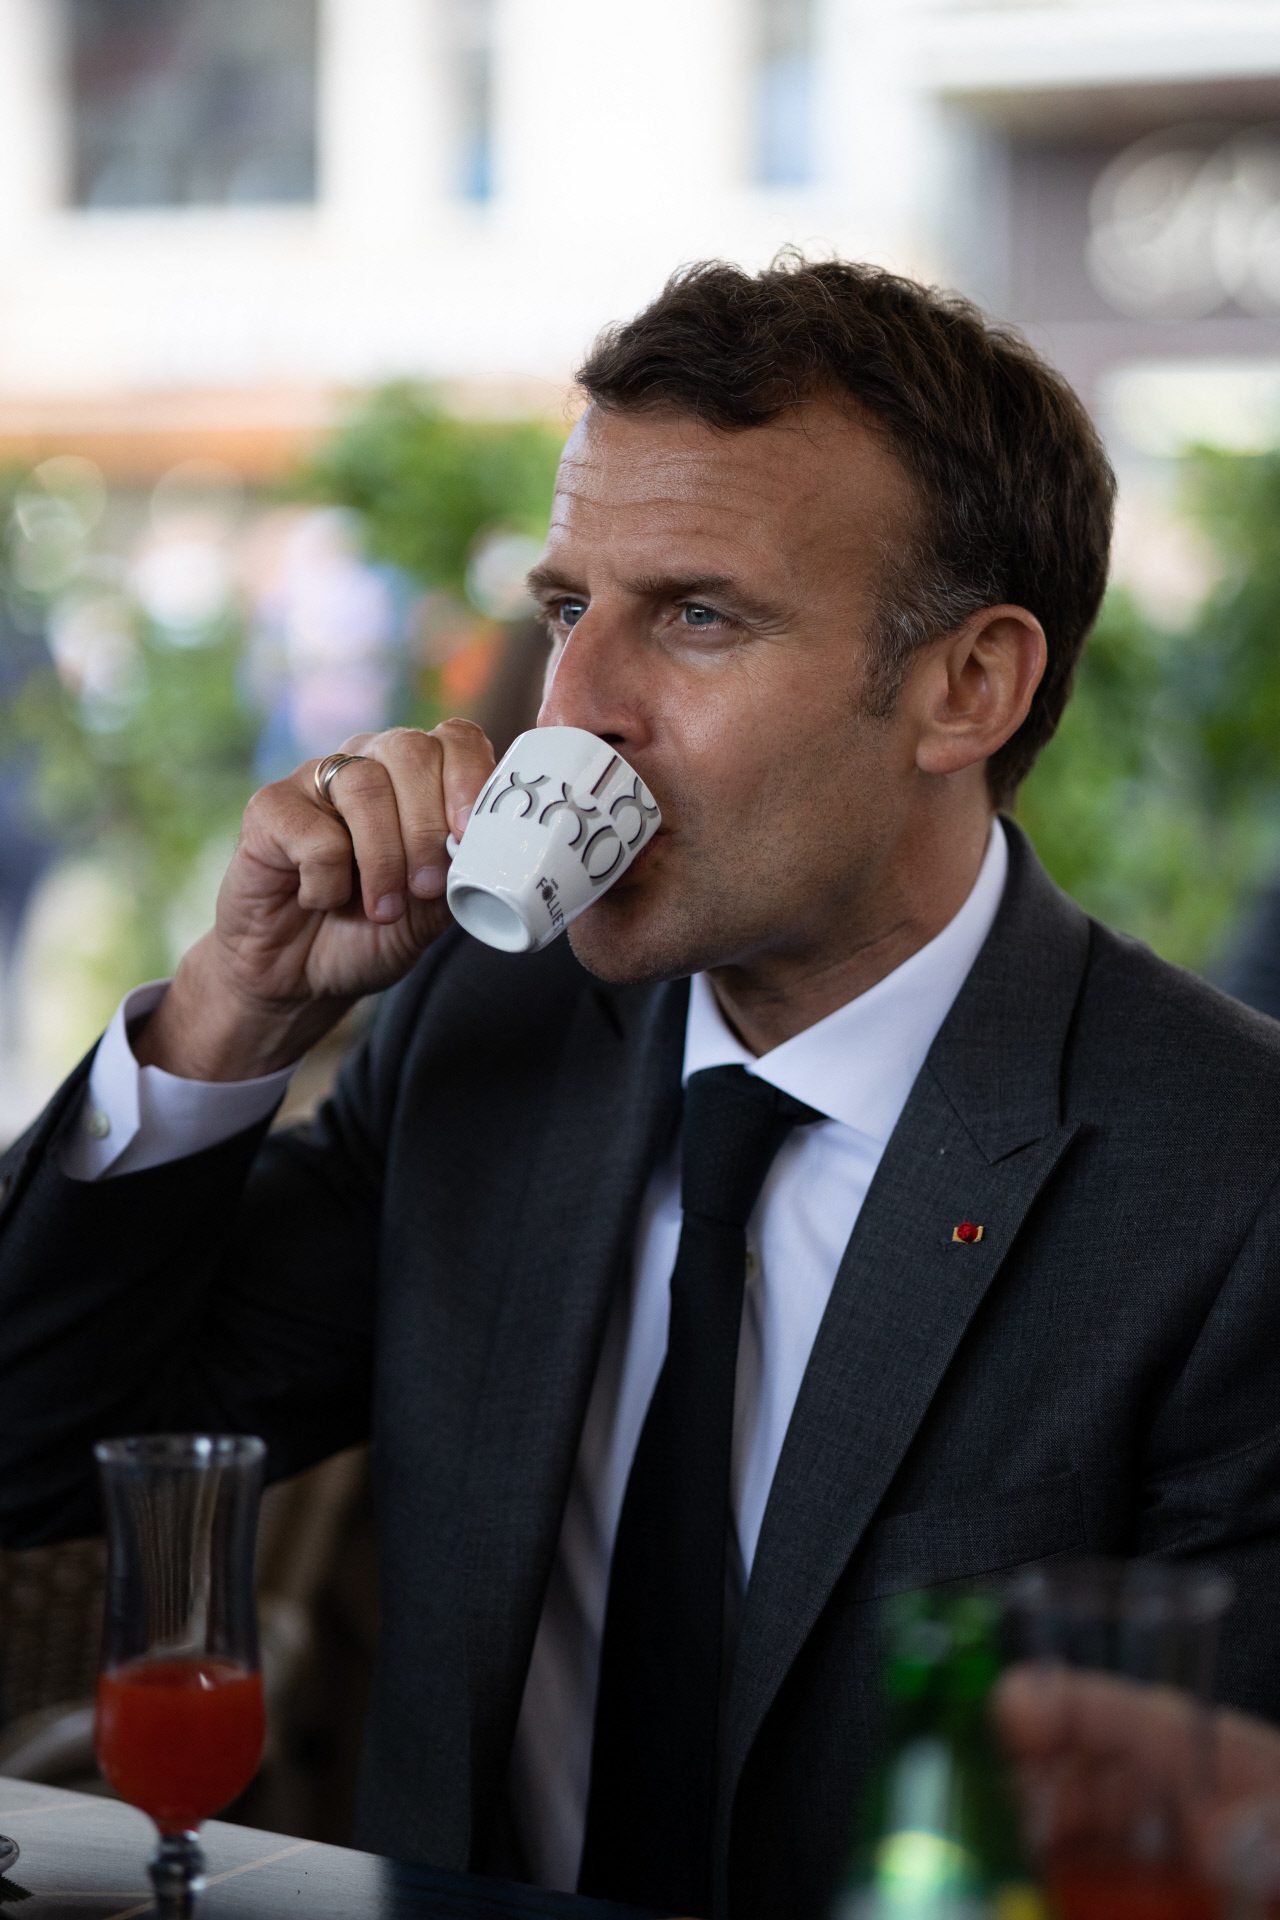 Emmanuel Macron does not forgive his coffee either